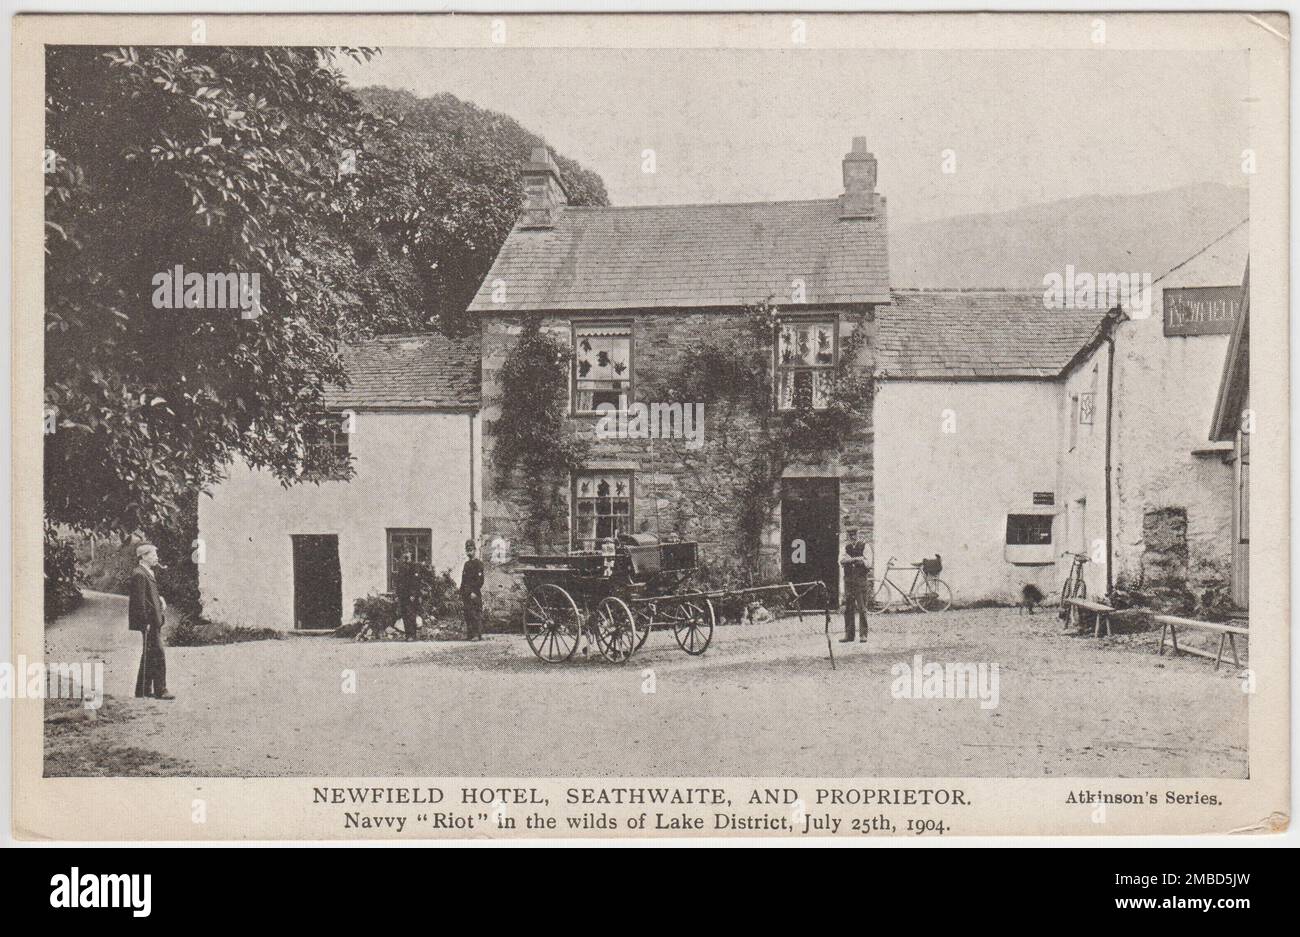 'Newfield Hotel, Seathwaite, and proprietor: Navvy 'riot' in the wilds of Lake District, July 25th 1904': postcard showing the hotel with smashed windows and a cart outside Stock Photo